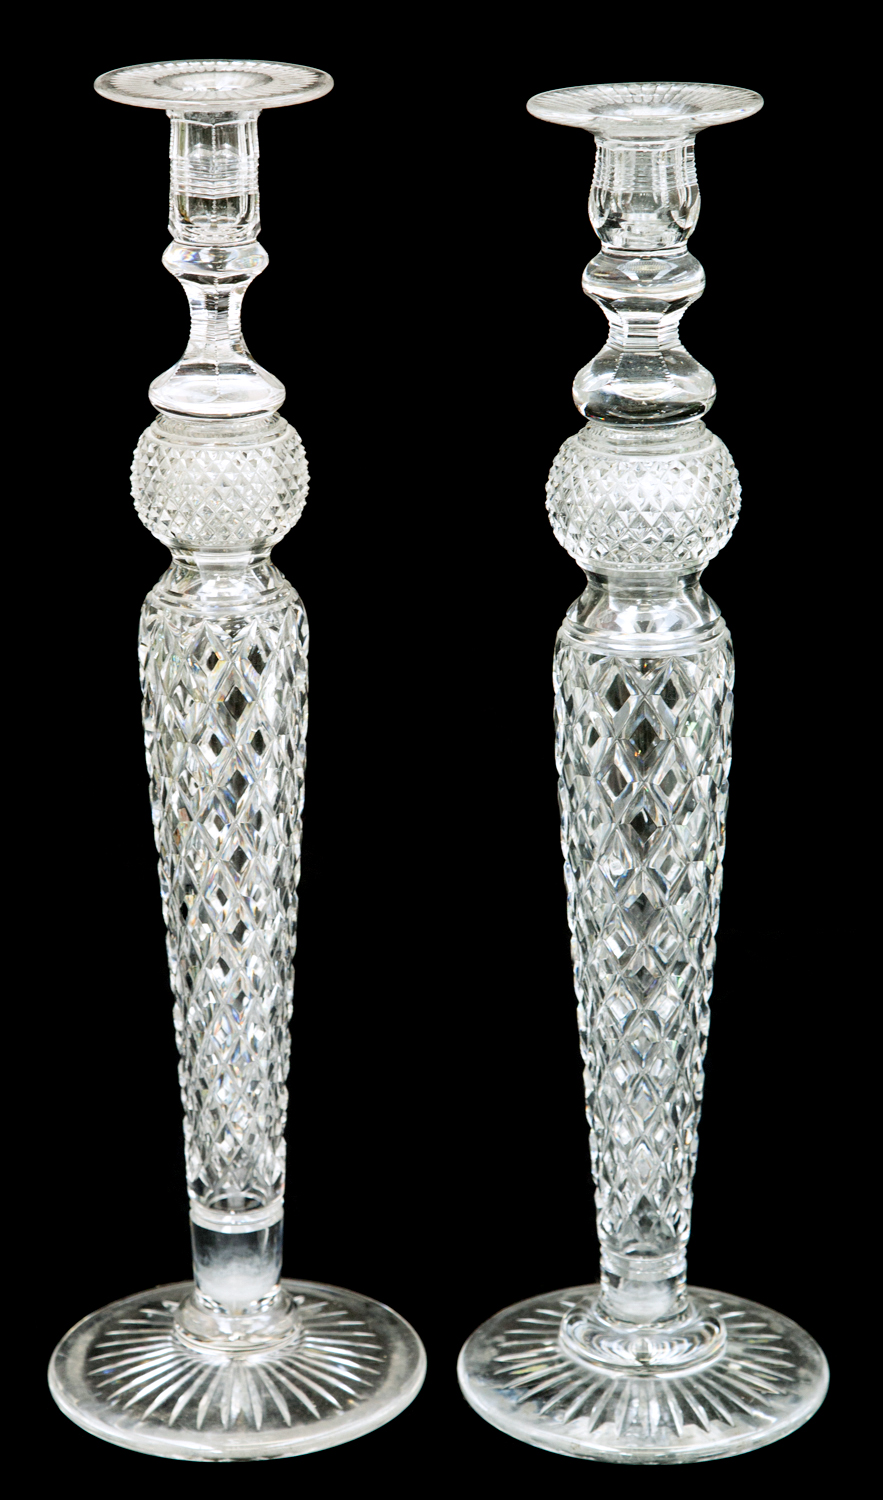 A pair of large cut glass candlestick, k